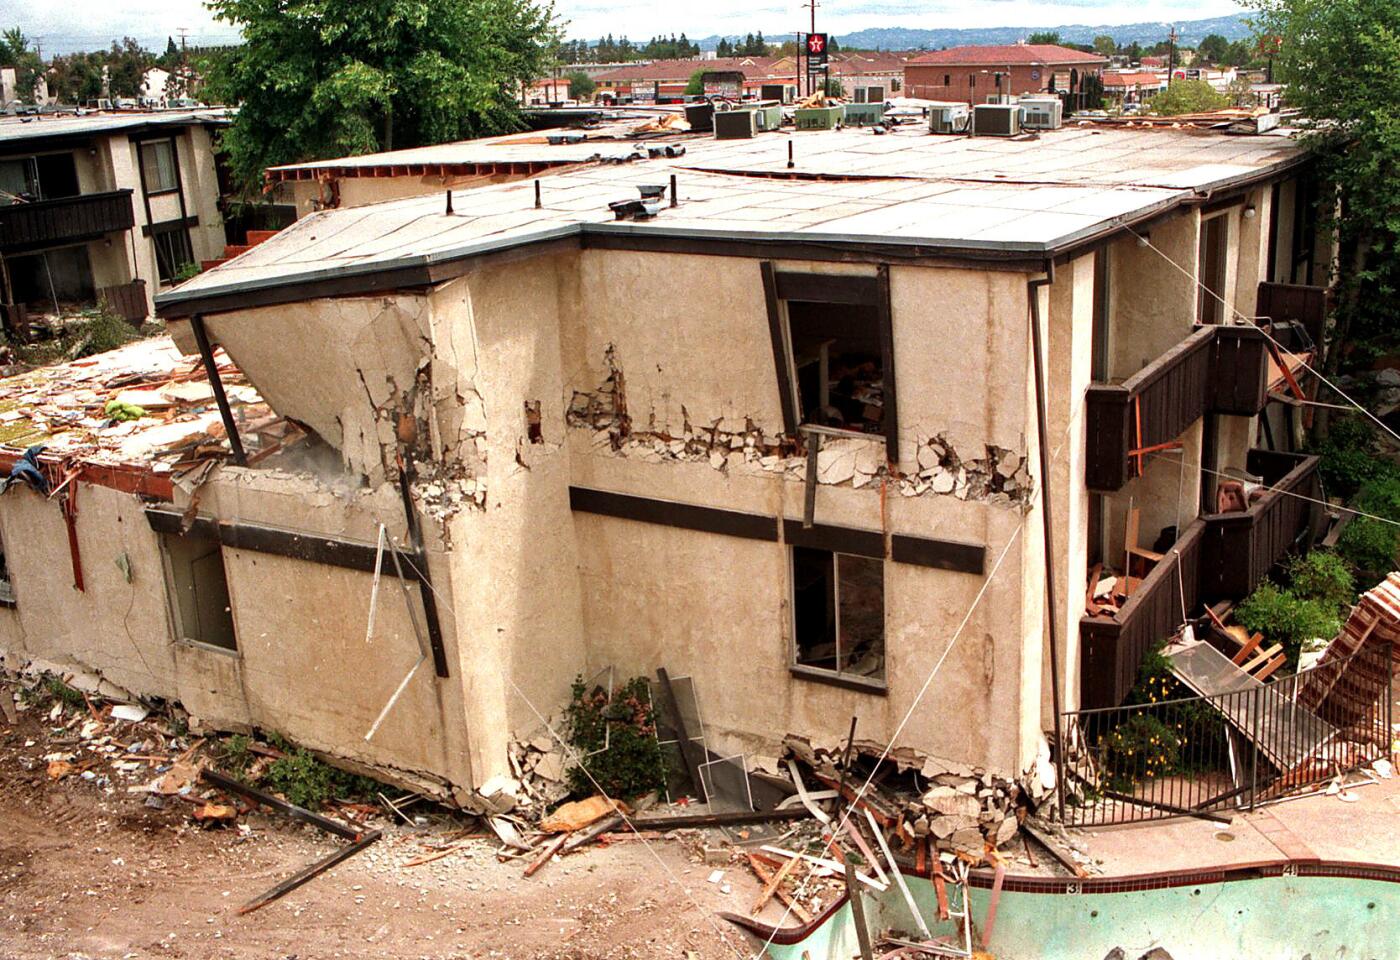 A section of the damaged Northridge Meadows apartment complex after the earthquake.